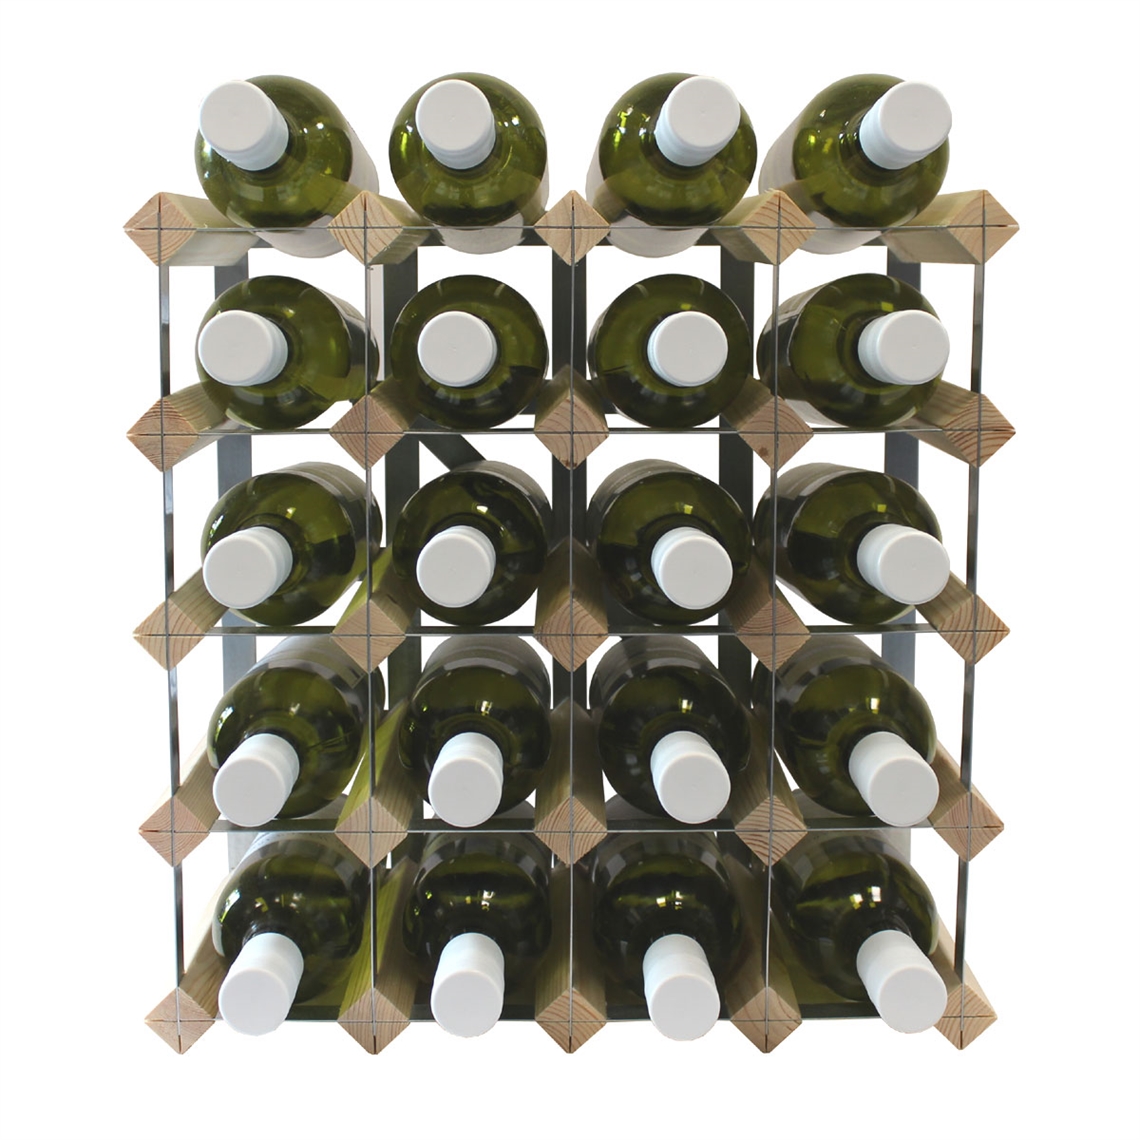 View more countertop wine rack buying guide from our Assembled Wine Racks range